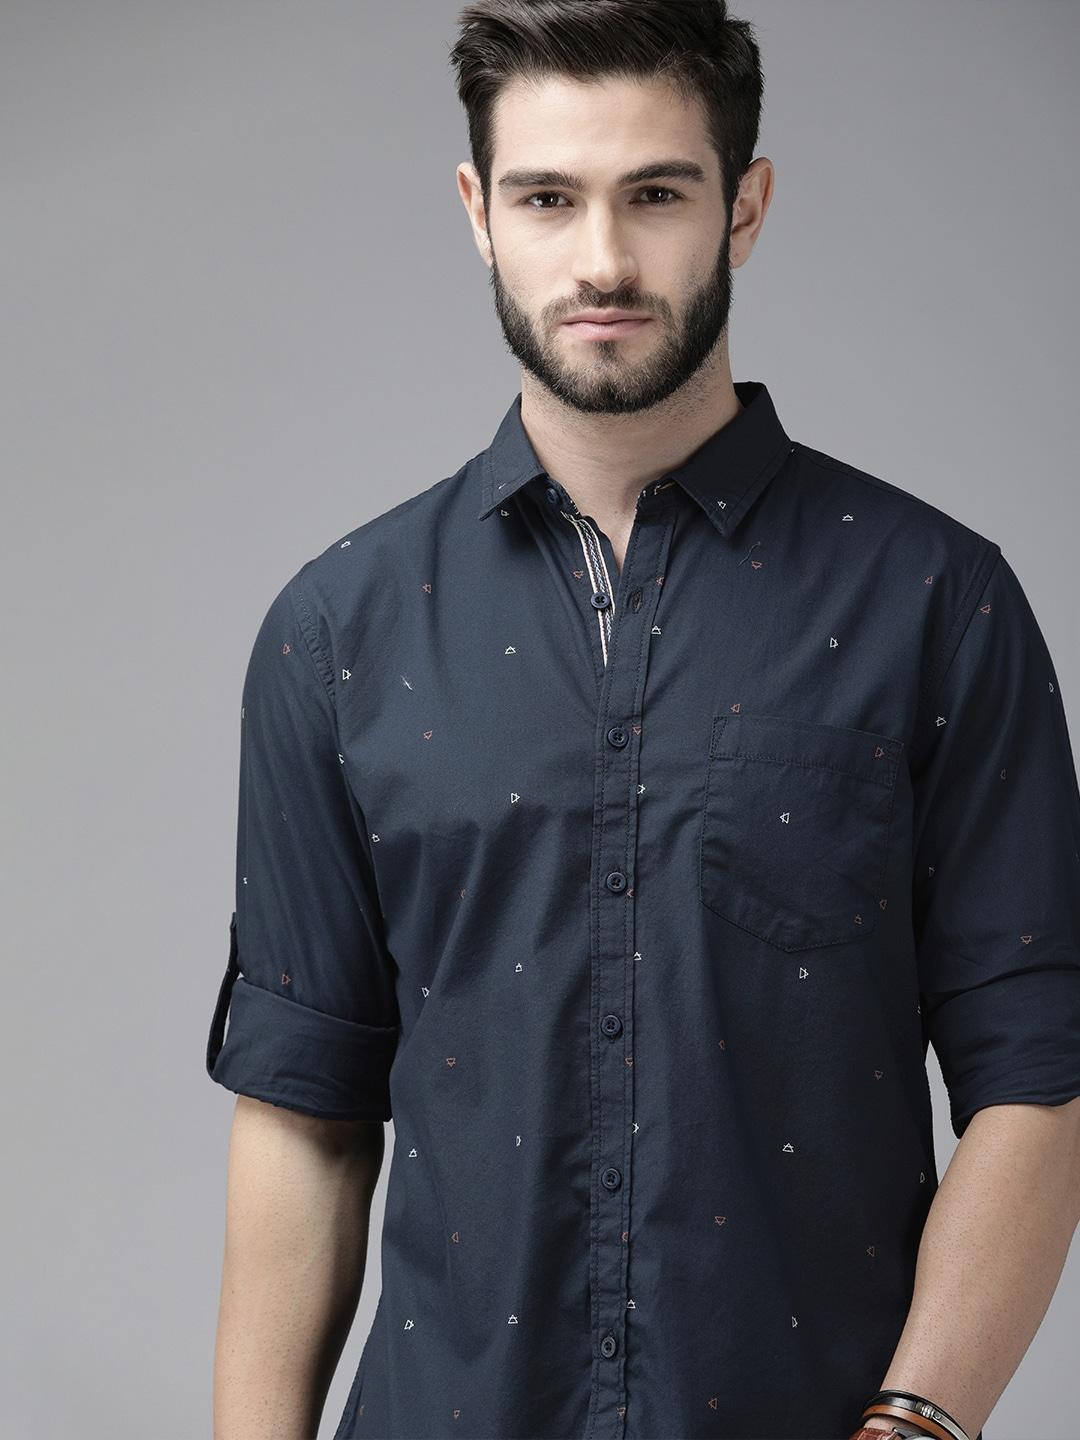 Roadster Men Navy Blue Printed Casual Pure Cotton Shirt